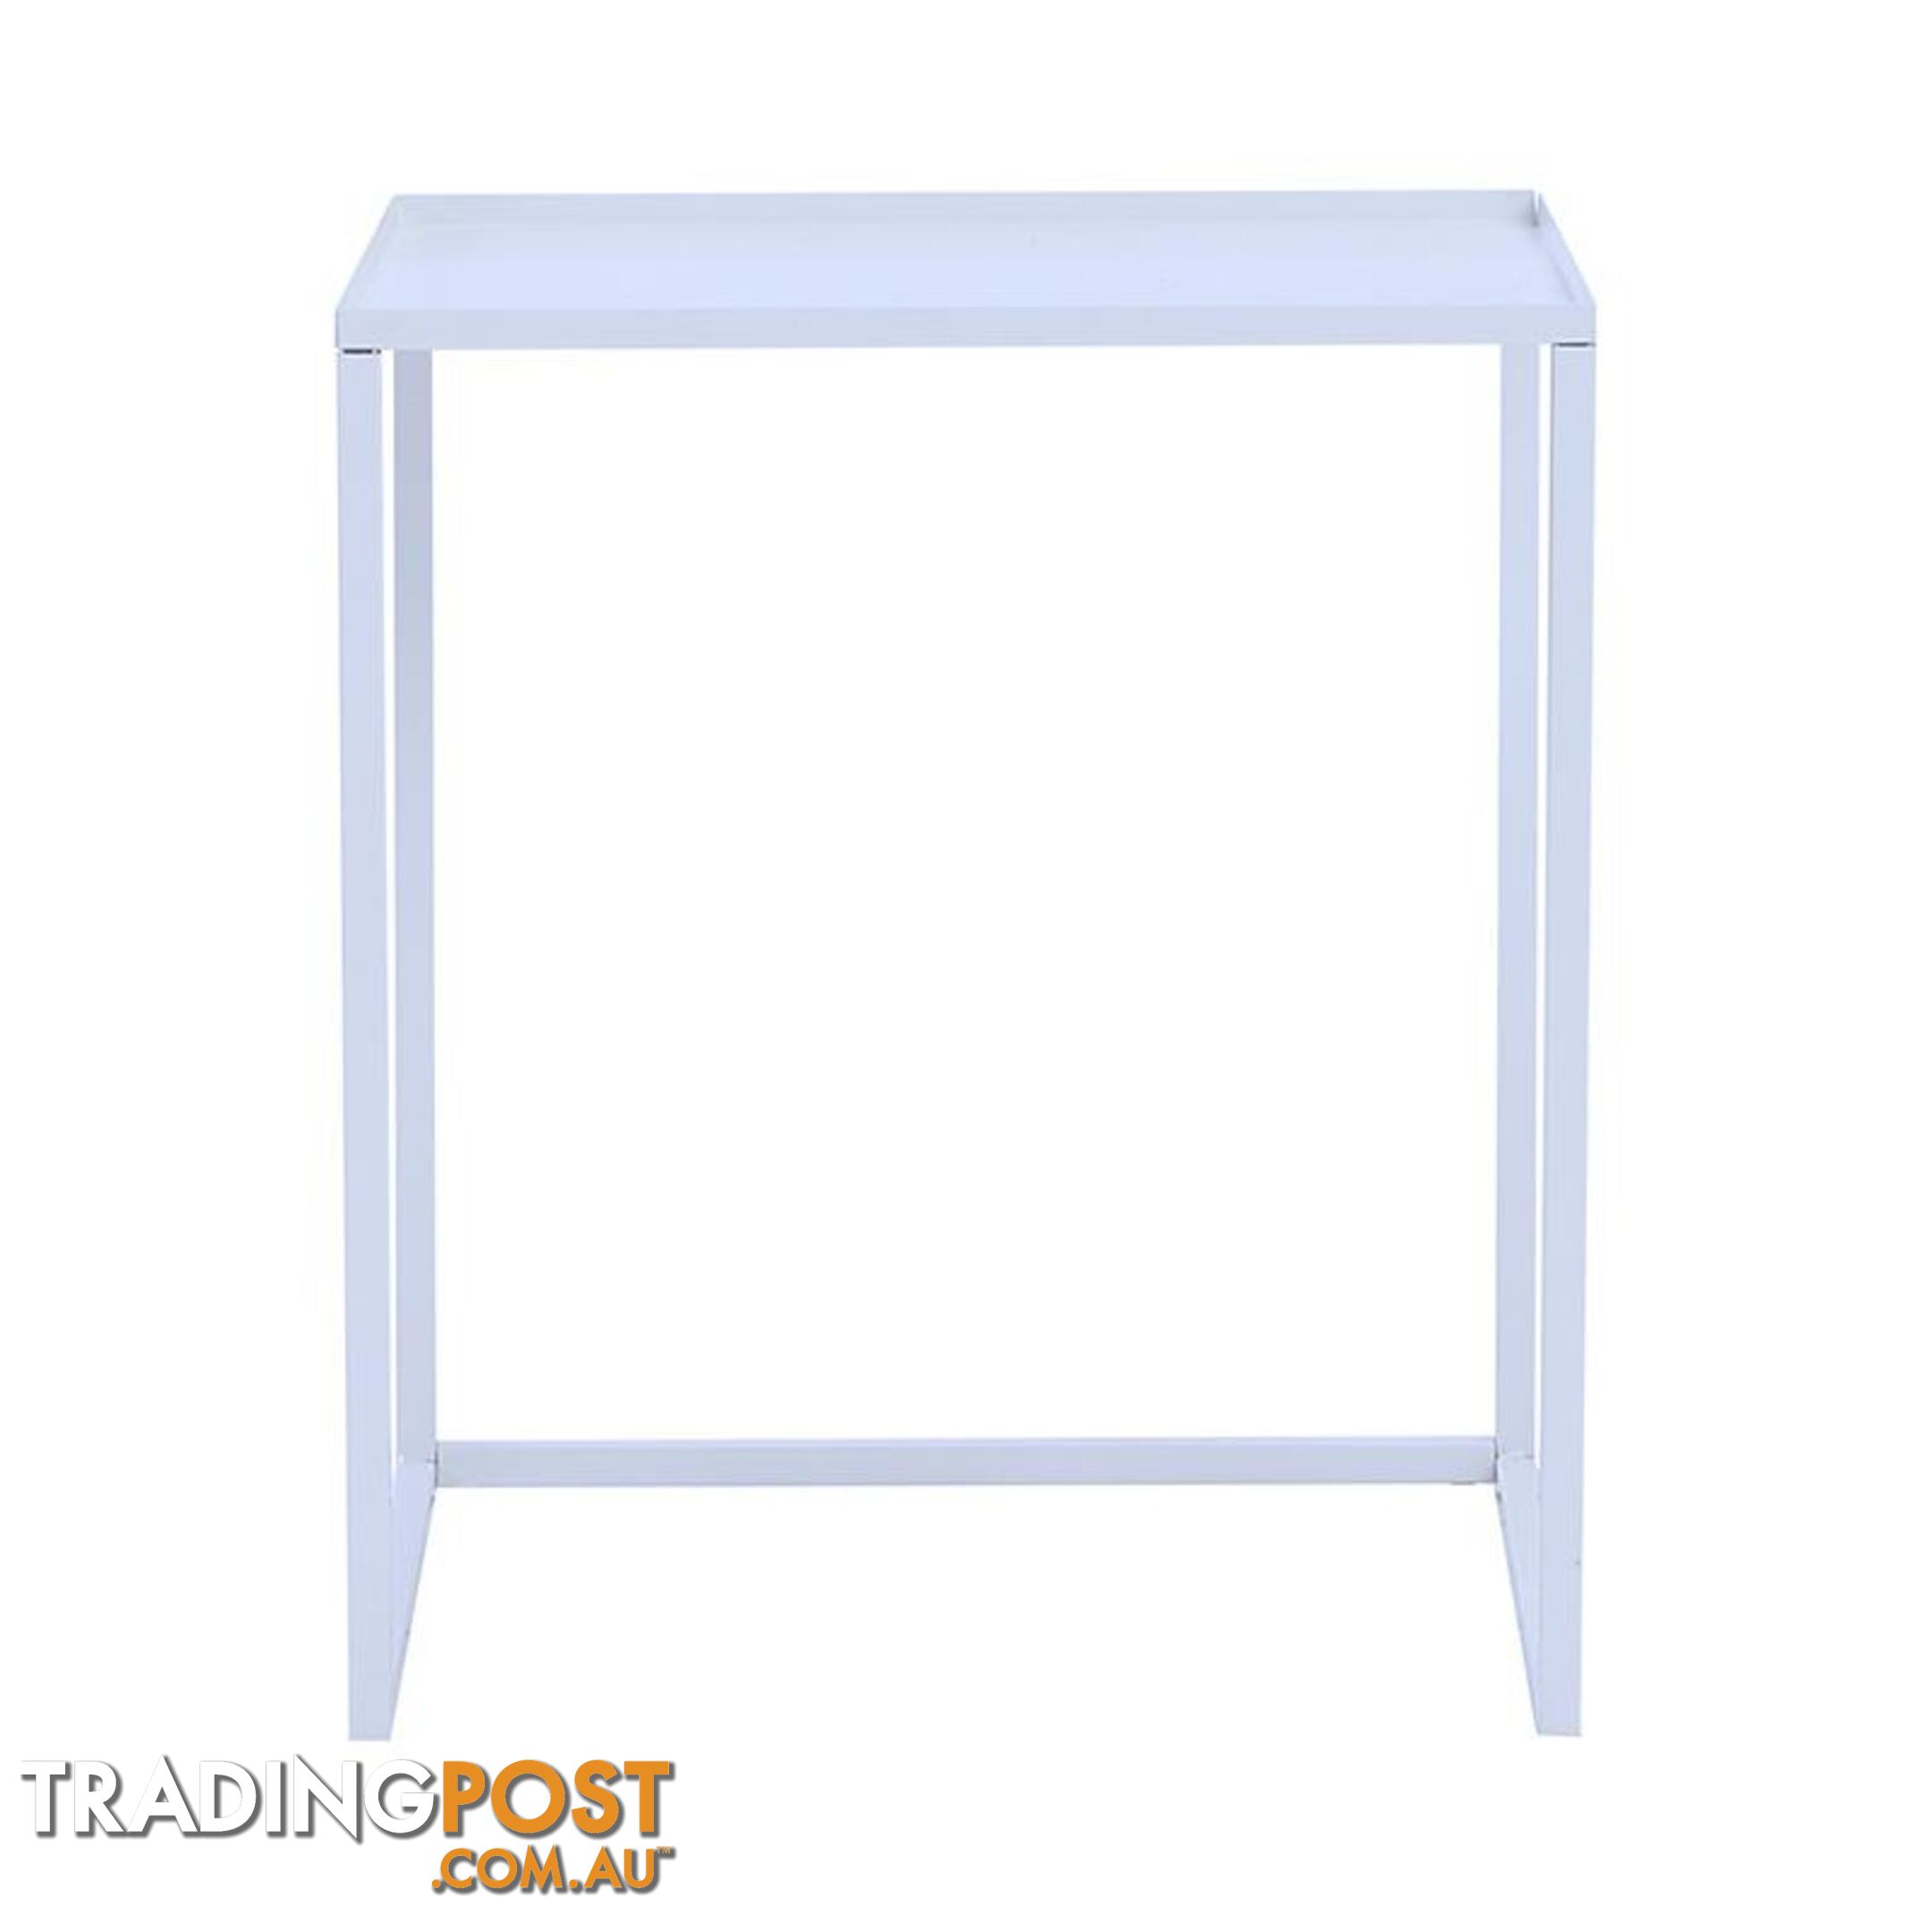 CARIAD Nest of 2 Tables  - White - 130020 - 9334719004648